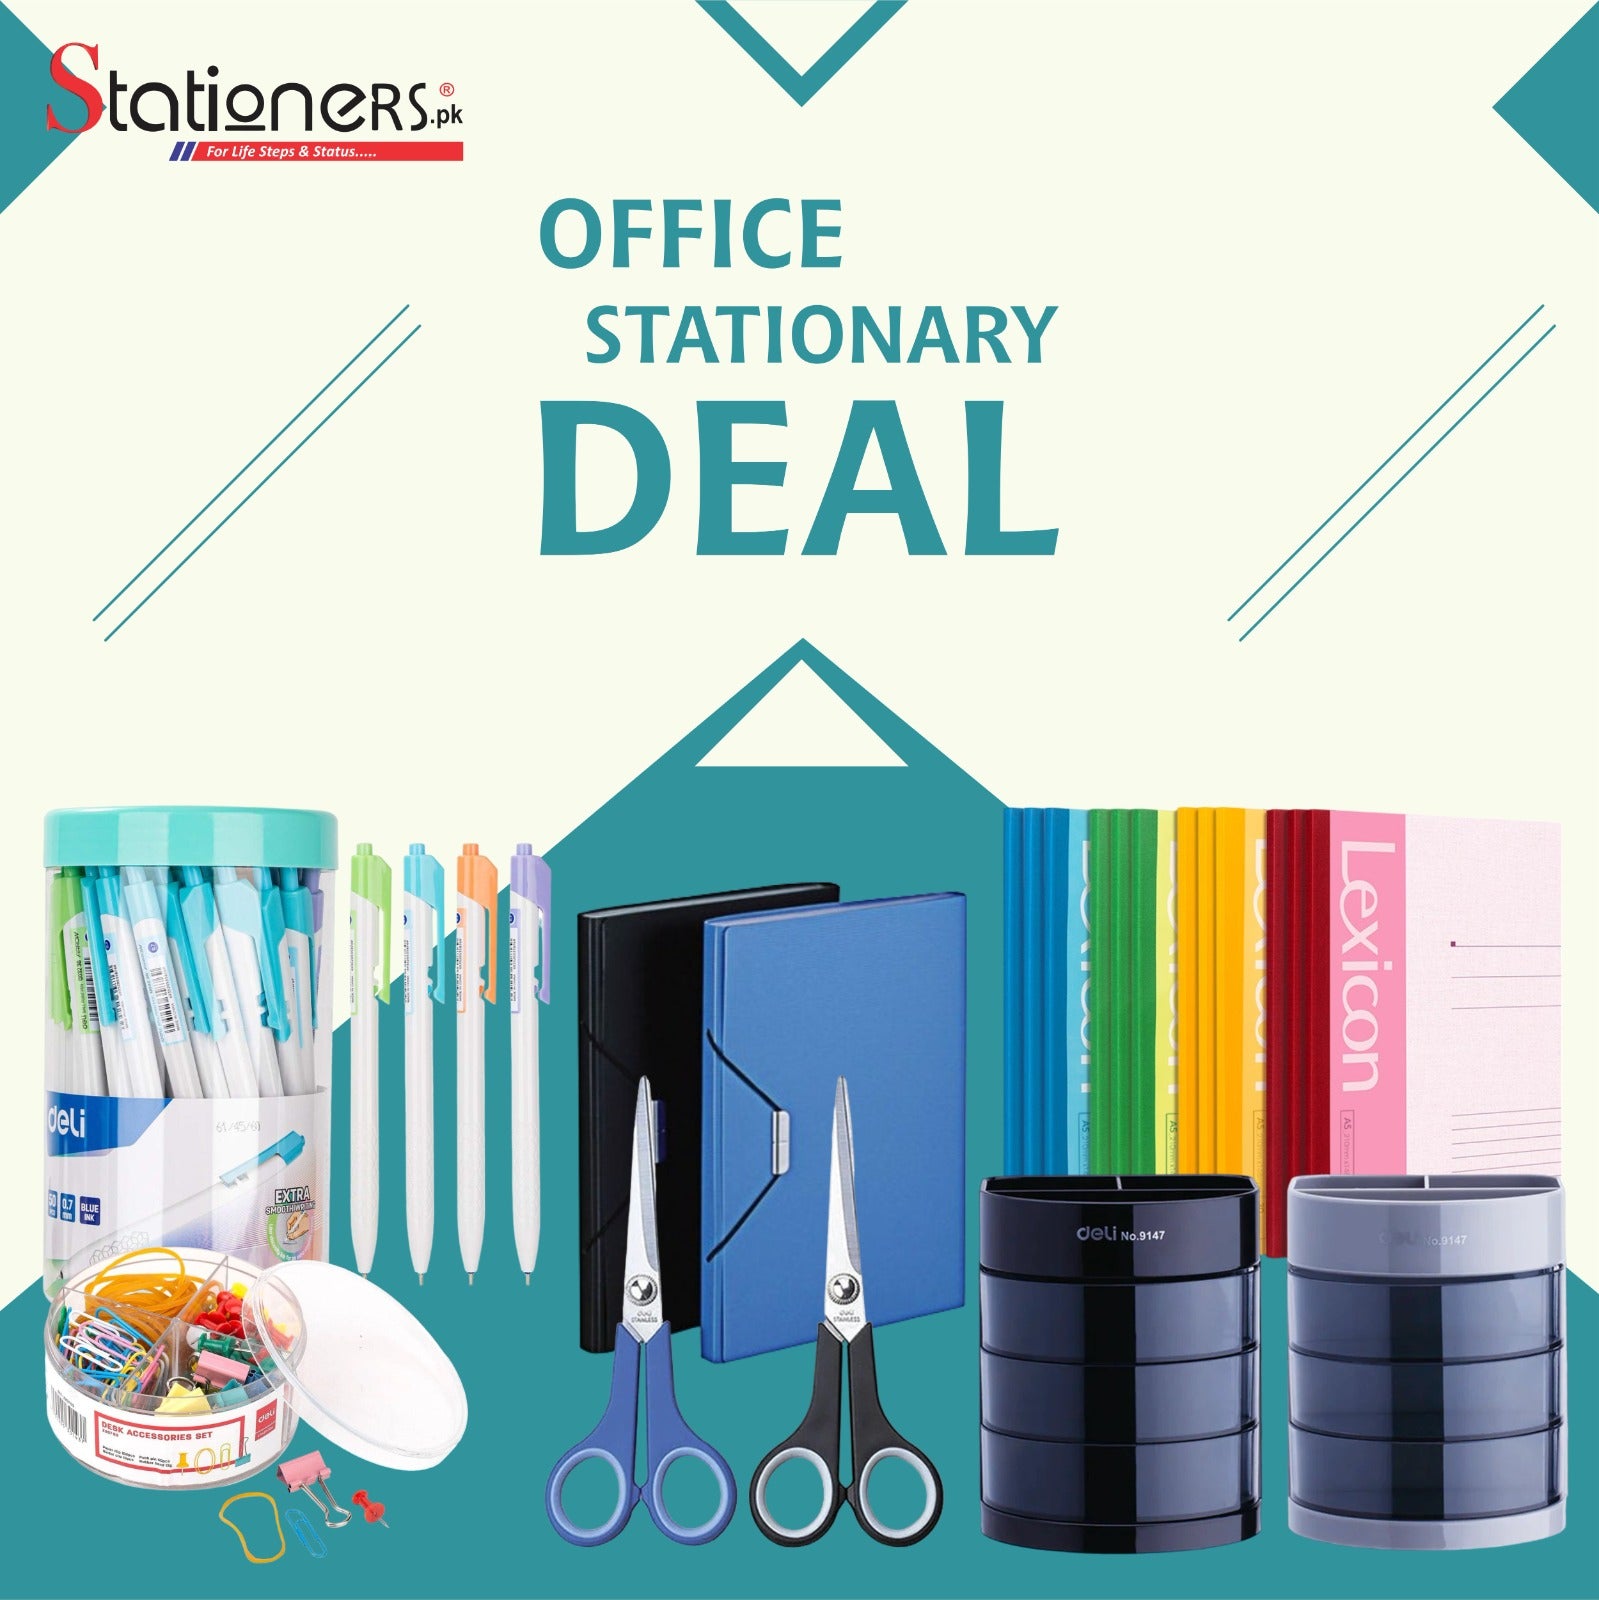 Deli Office Stationery Deal